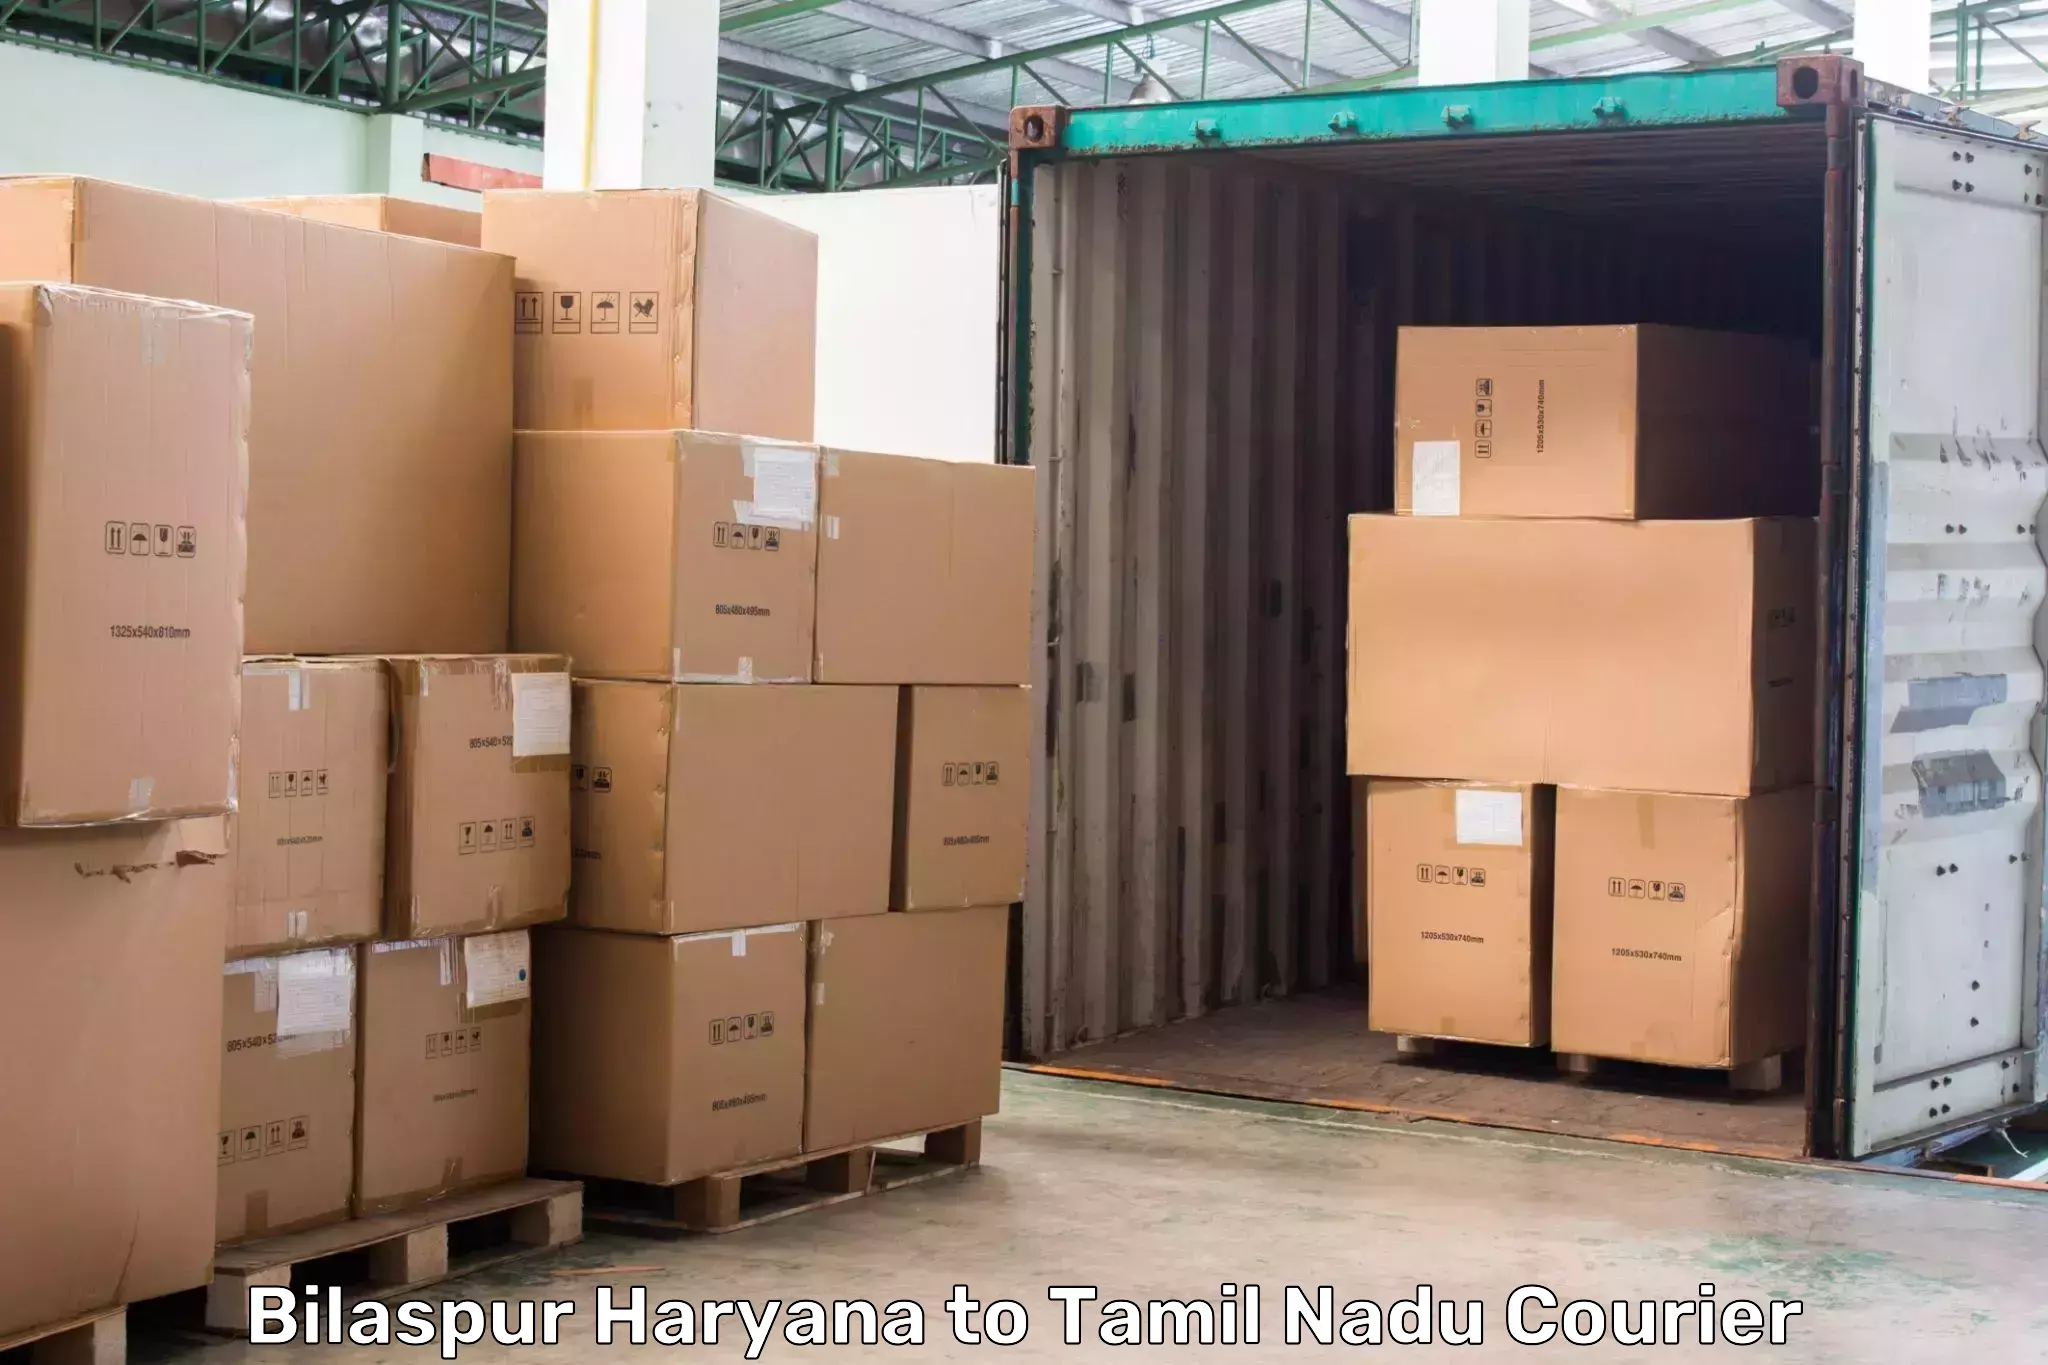 Reliable parcel services Bilaspur Haryana to Dindigul